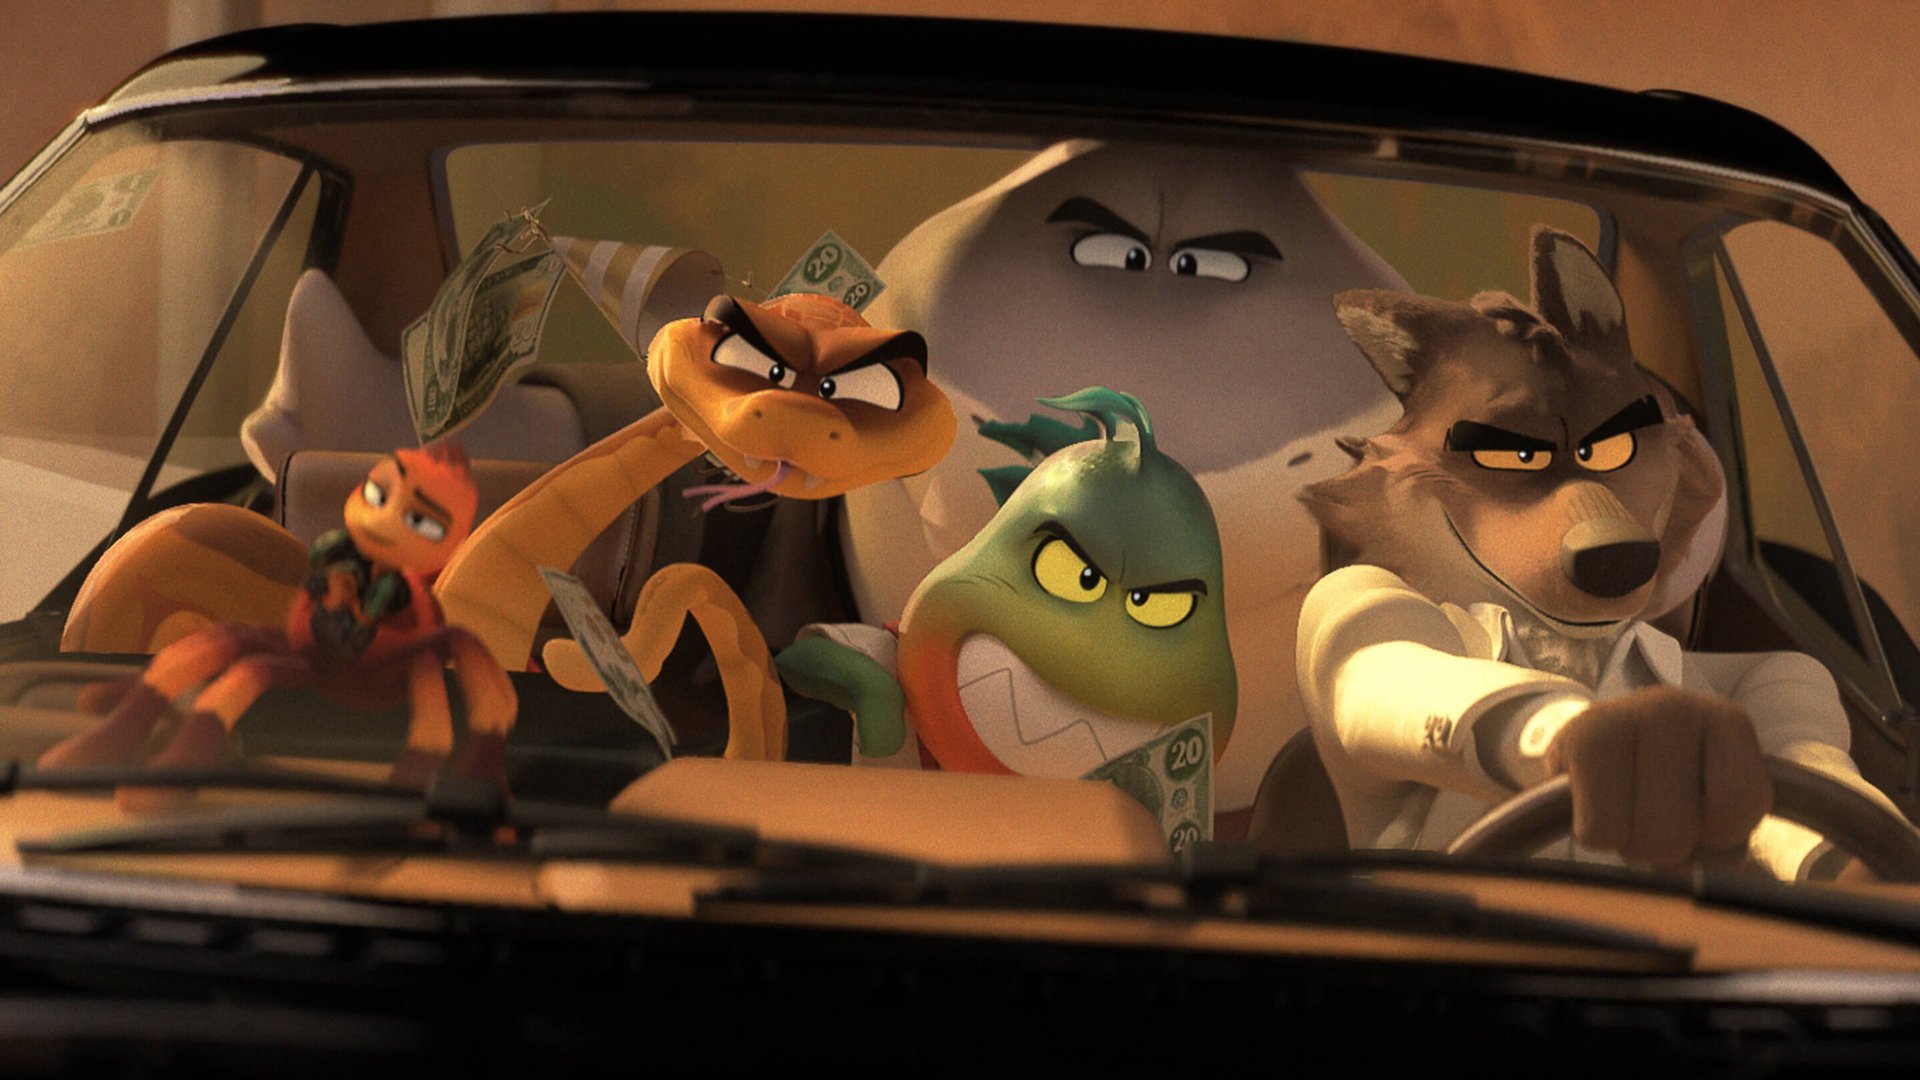 A group of animated animals sit in a car looking mischievous.